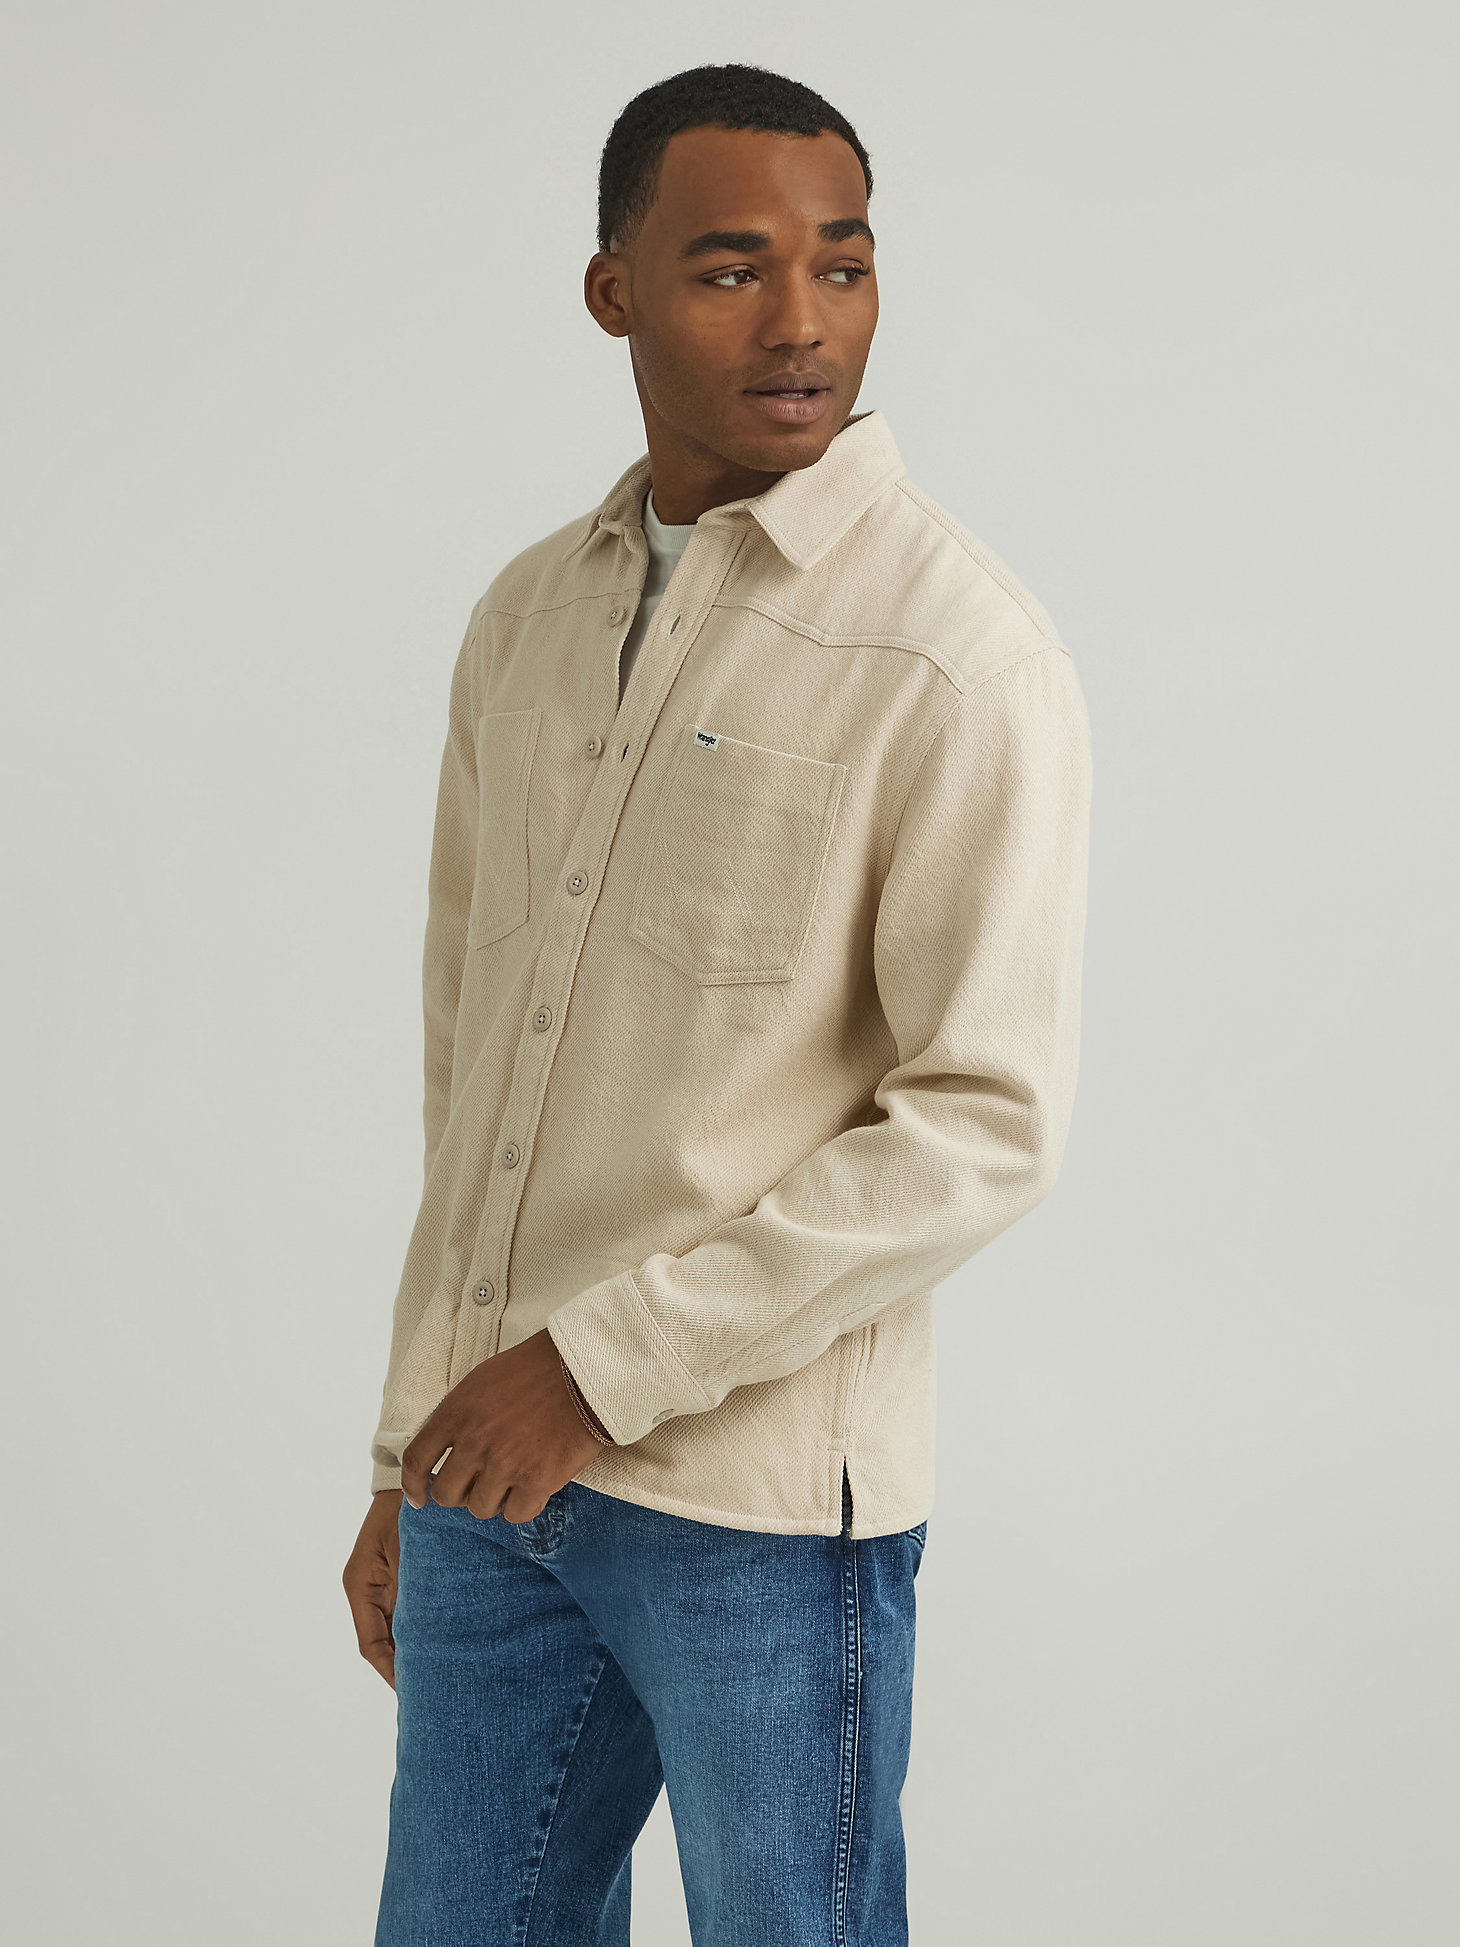 Men's Twill Overshirt in Oatmeal alternative view 2